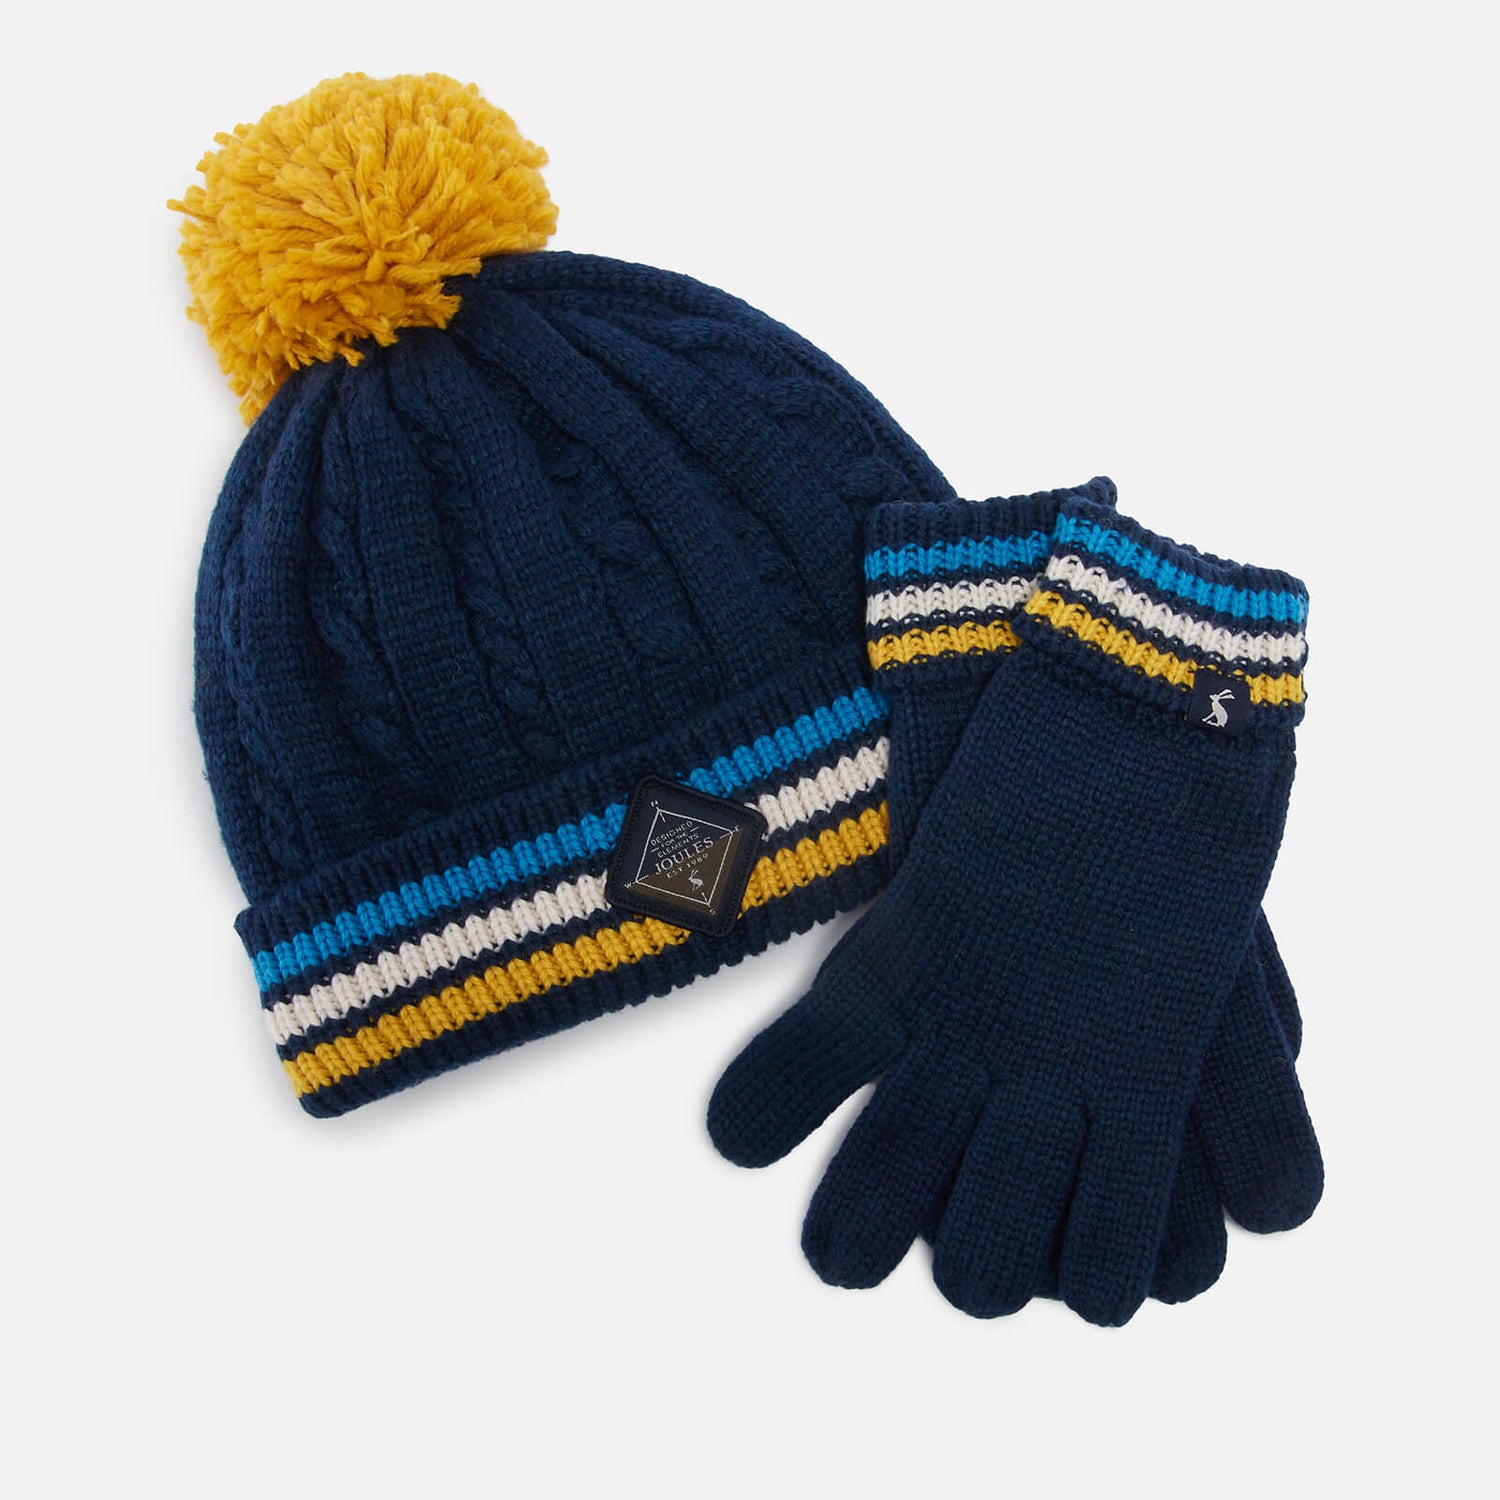 Joules Kids Hartlow Knit Hat and Gloves Set - 3 - 7 Years